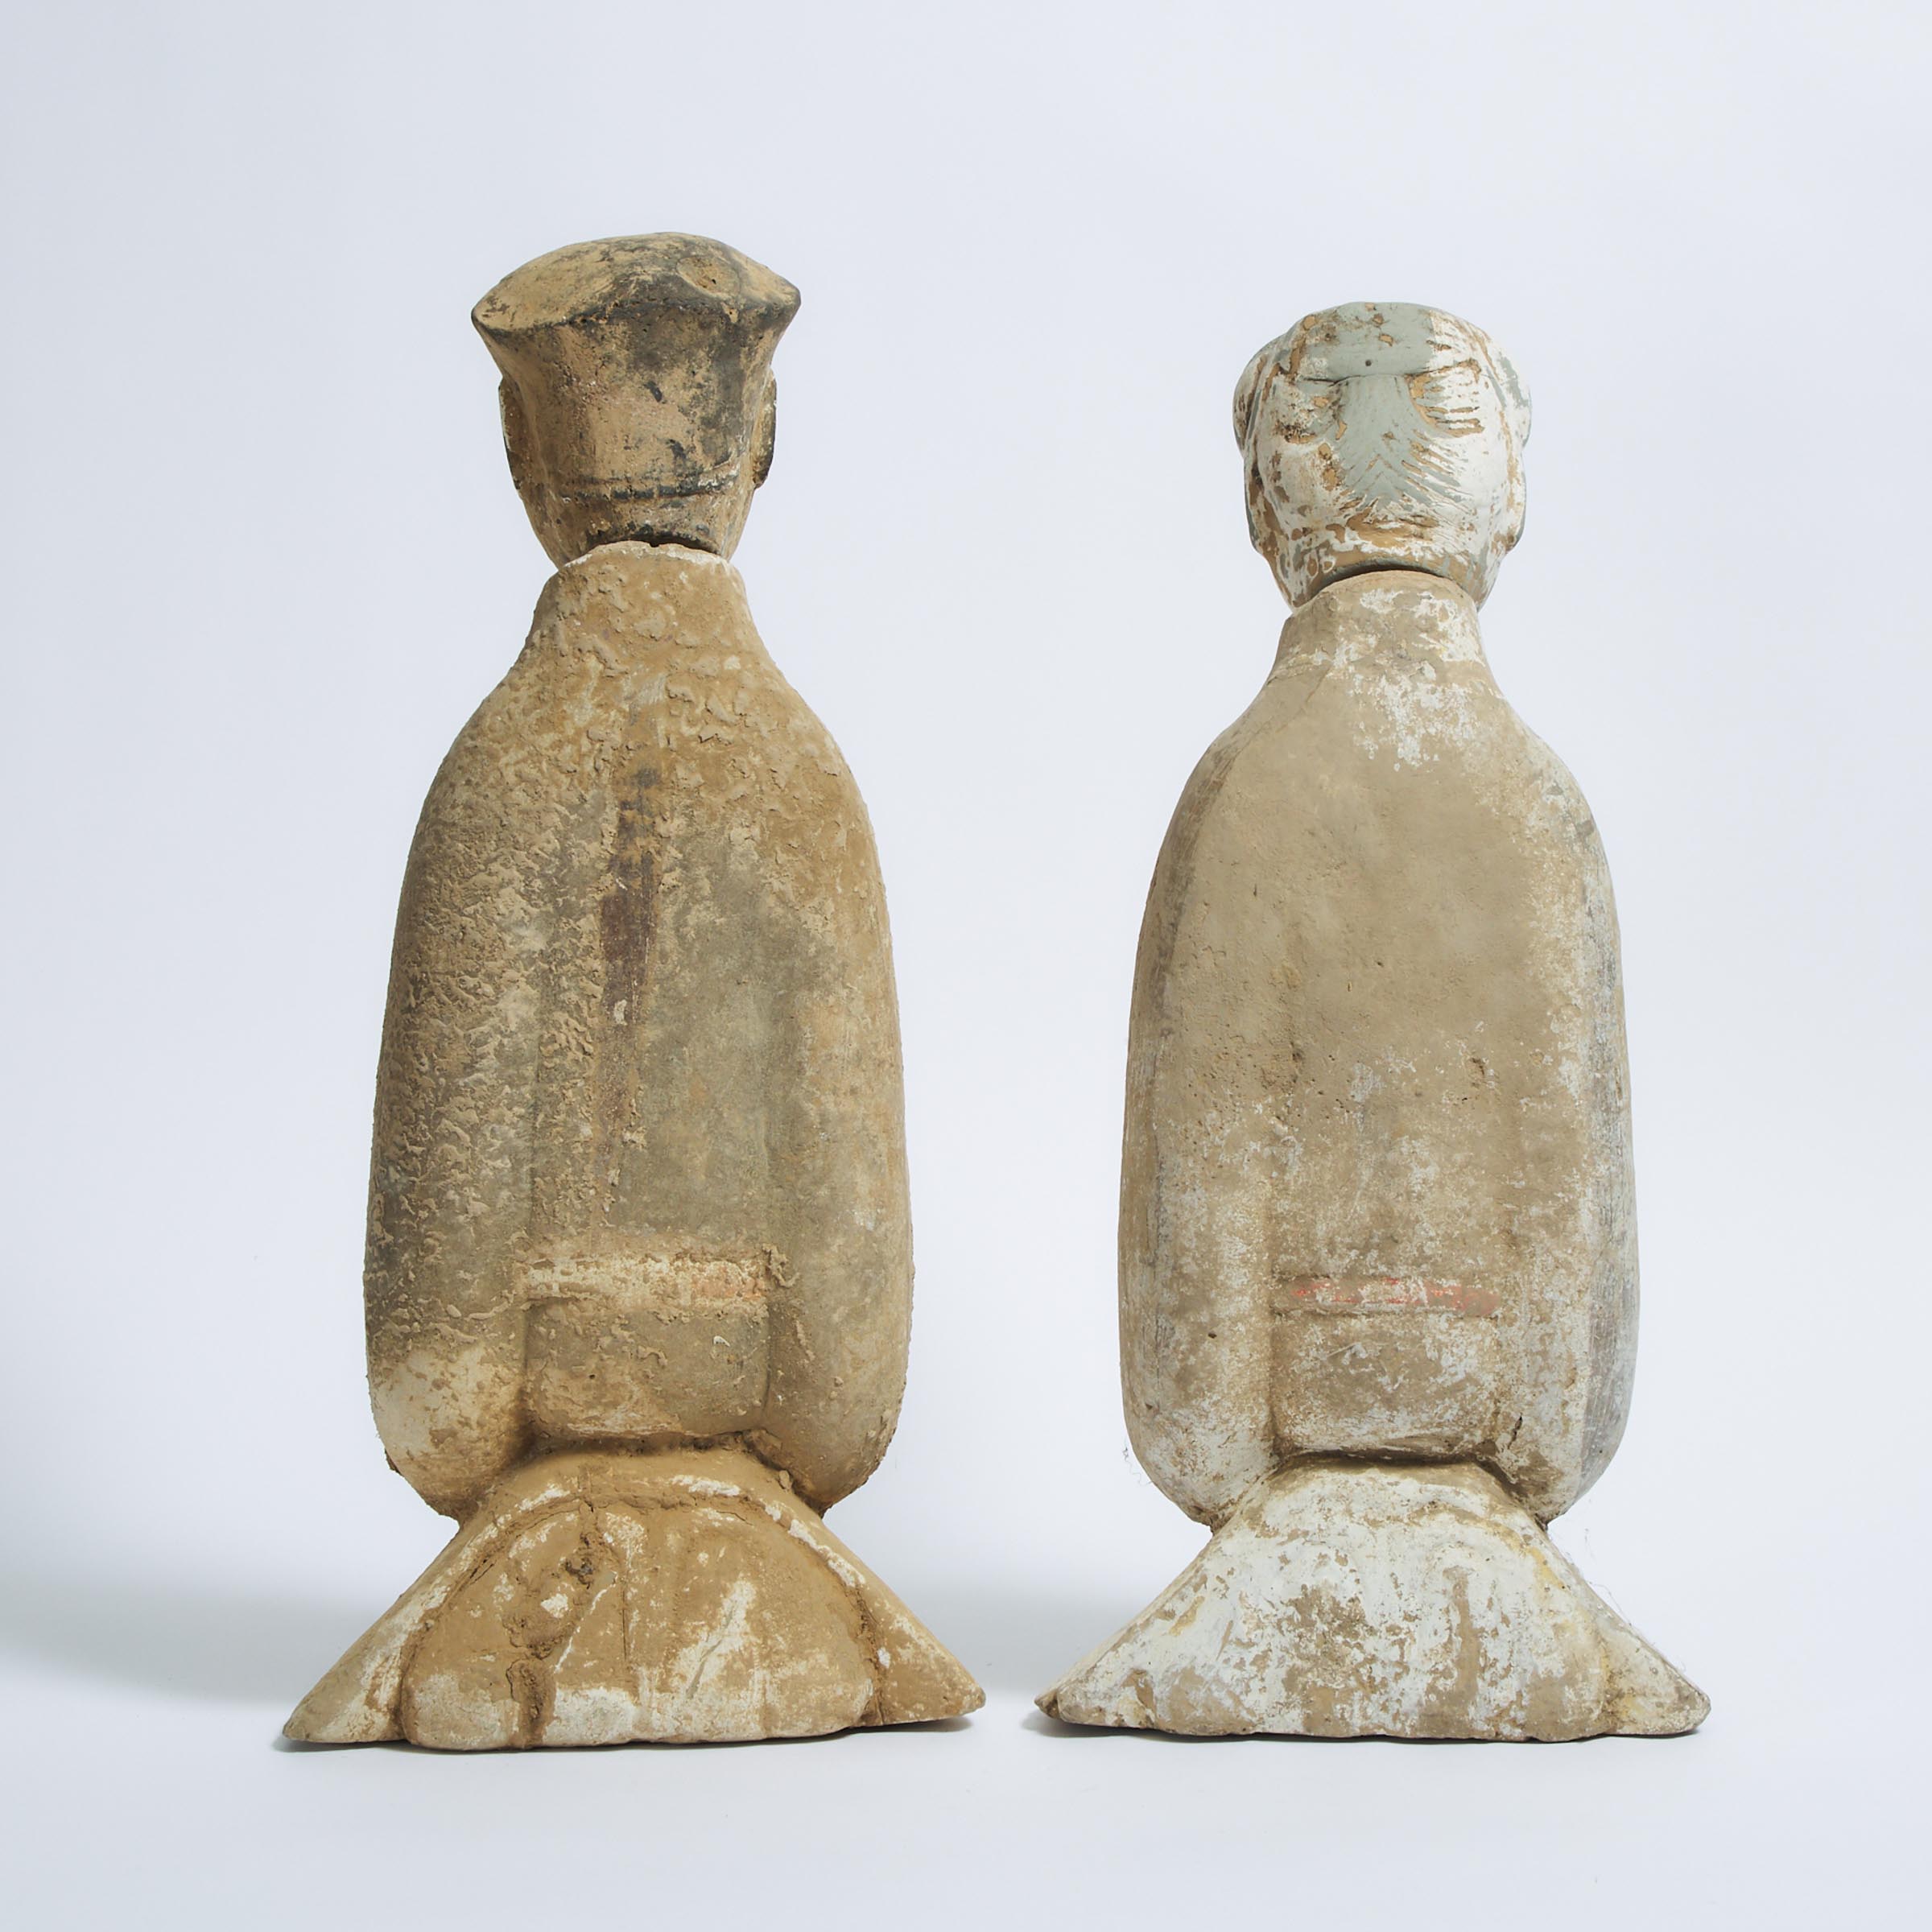 A Pair of Large Painted Pottery Figures of Attendants, Han Dynasty (206 BC - AD 220)